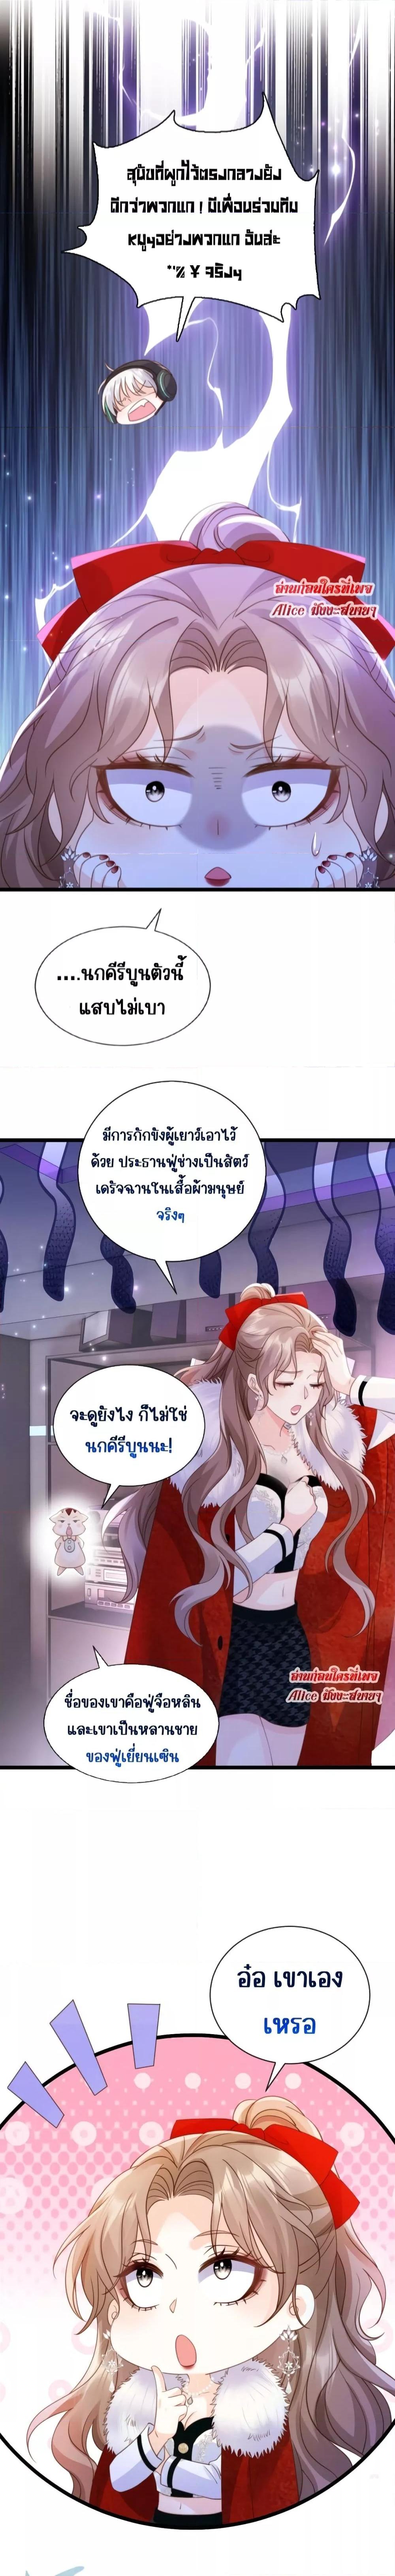 Goxuewen Female Supporting Role She Quit โ€“ เธเธญเธเธฐเธ—เธตเธเธฑเธเธเธ—เธขเธฑเธขเธ•เธฑเธงเธฃเนเธฒเธขเนเธเธเธดเธขเธฒเธขเธเนเธณเน€เธเนเธฒ เธ•เธญเธเธ—เธตเน 5 (2)